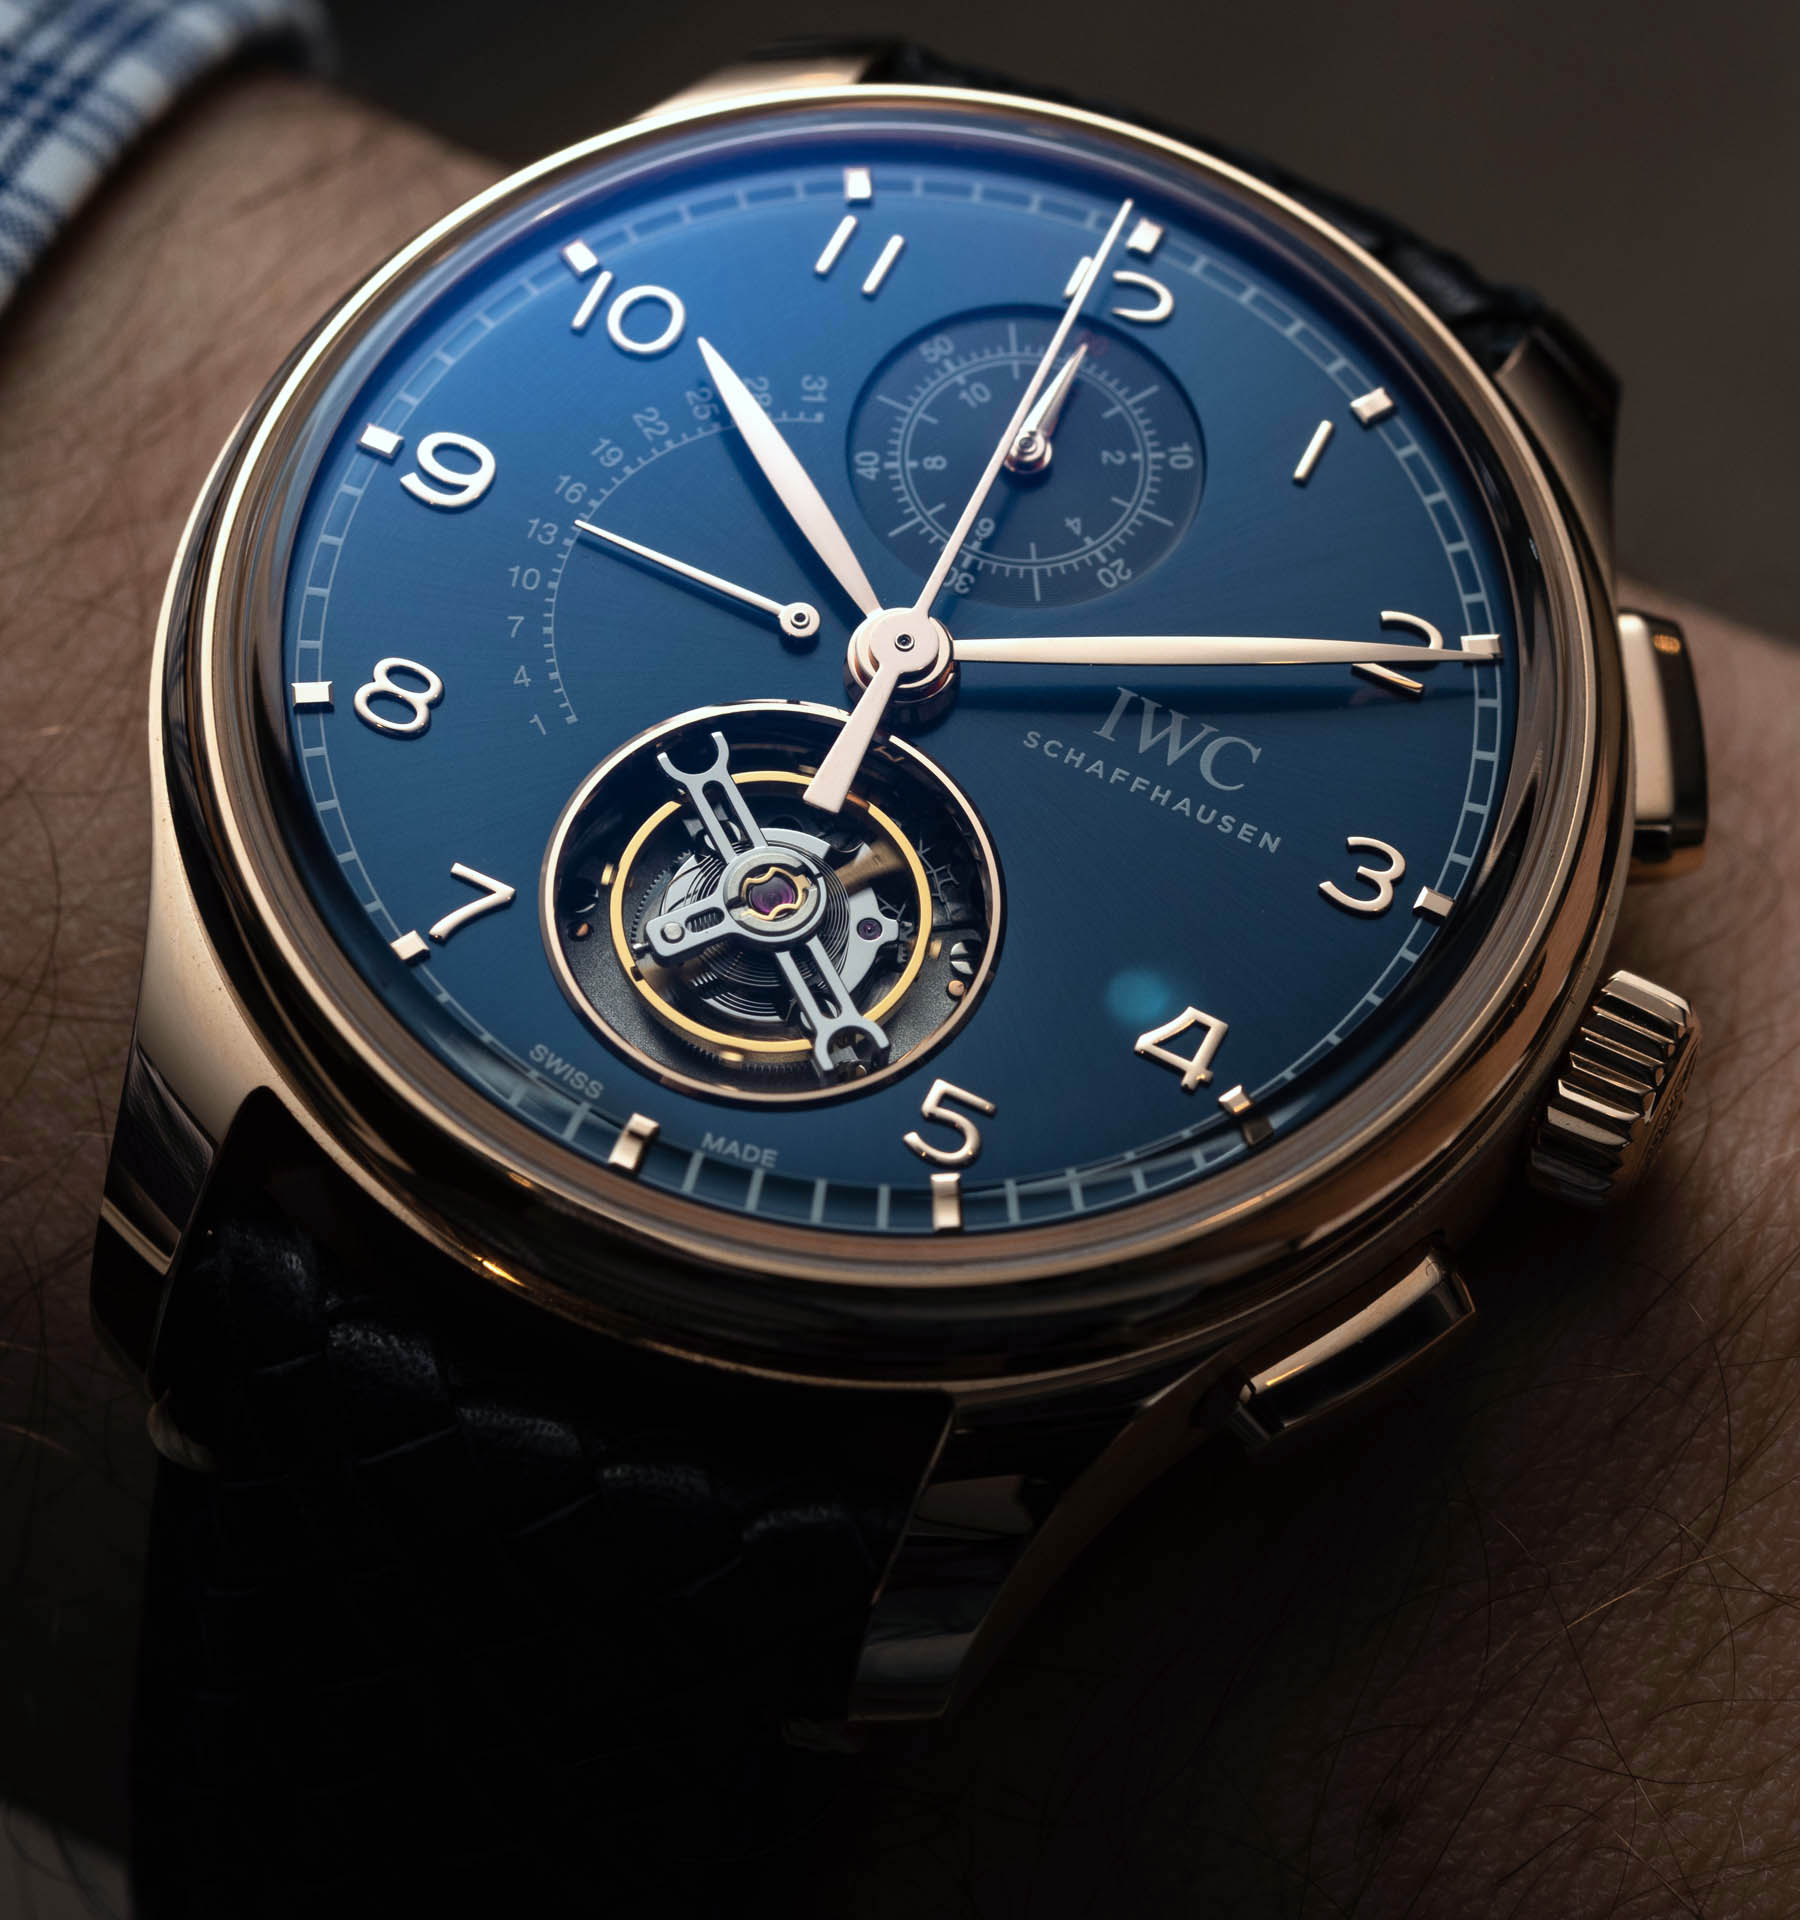 8 tourbillon watches we loved in 2020